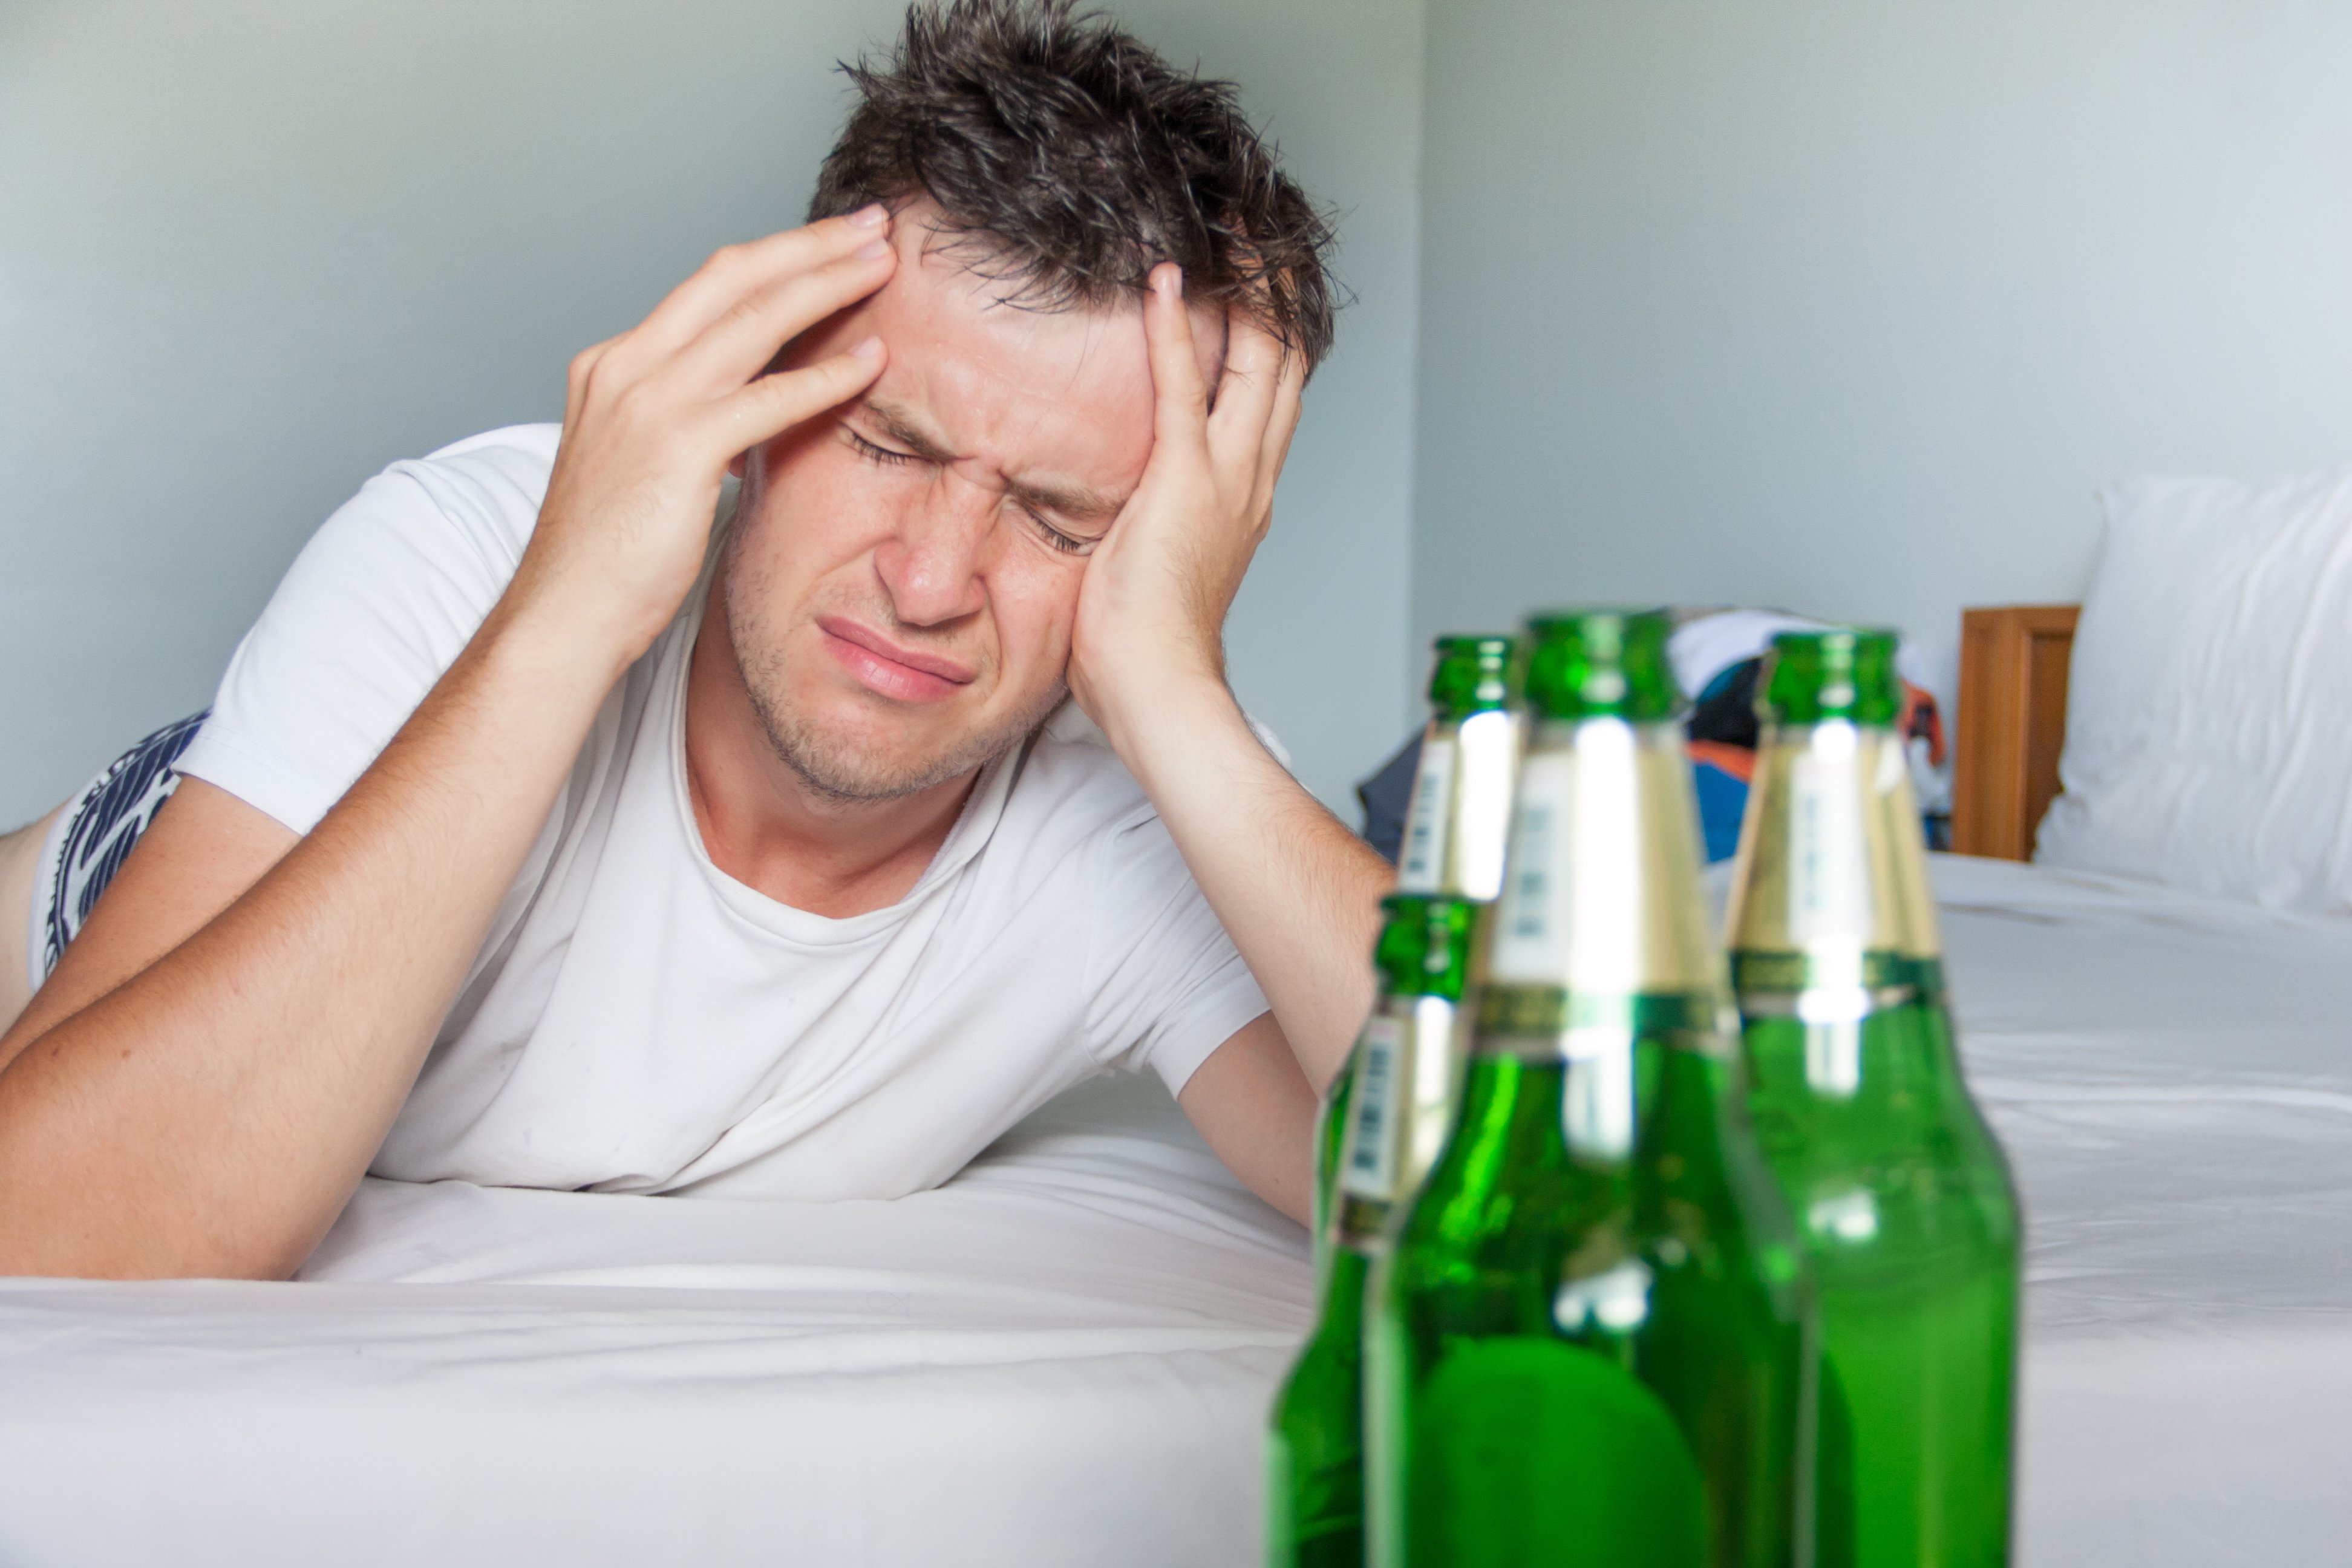 Man suffering from a hangover while holding his aching head | Photo: Shutterstock/Michael Traitov